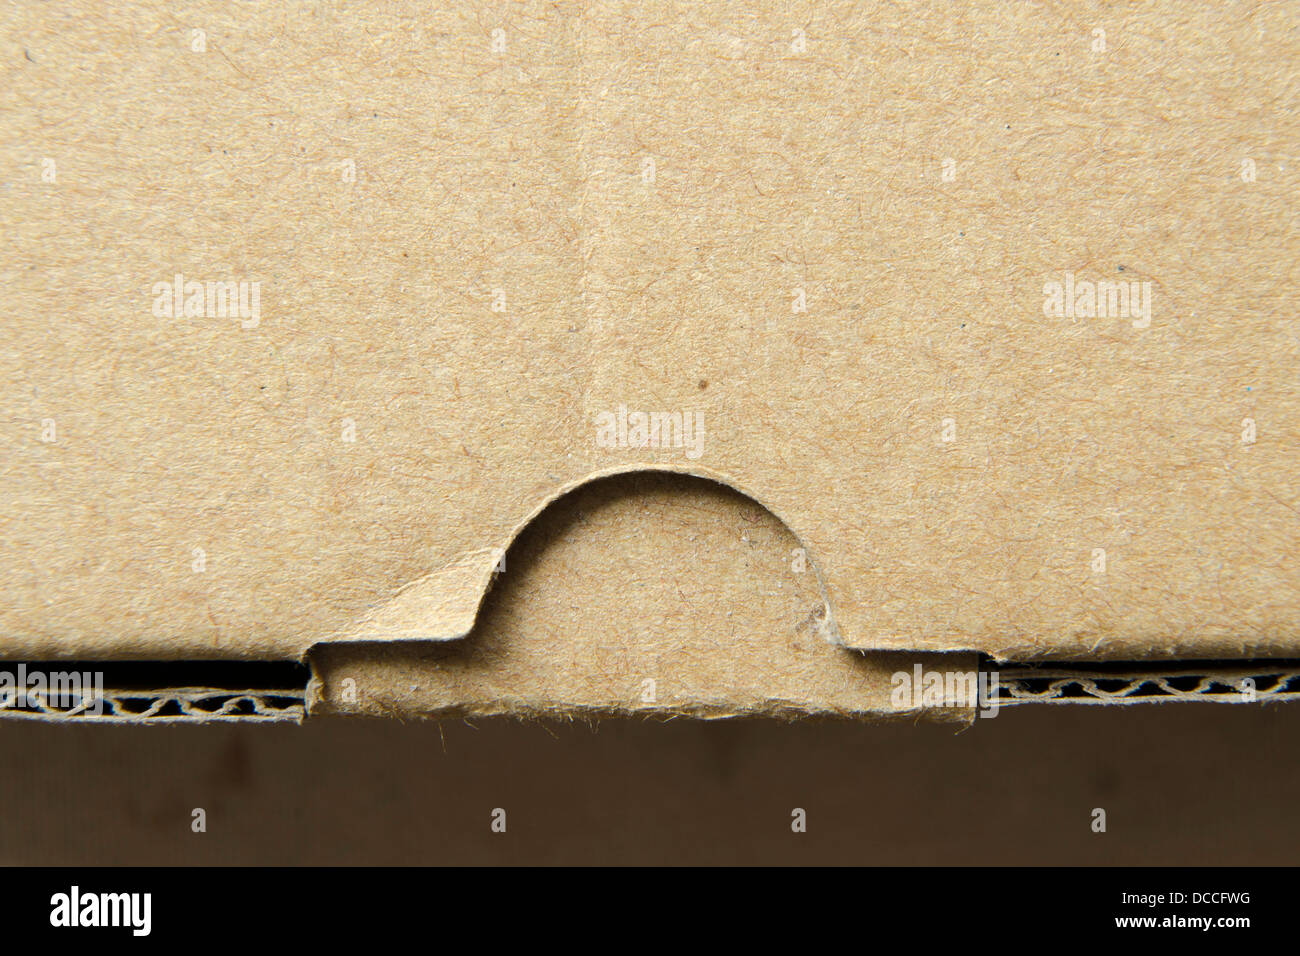 fragment of closed cardboard box with focus on lock Stock Photo